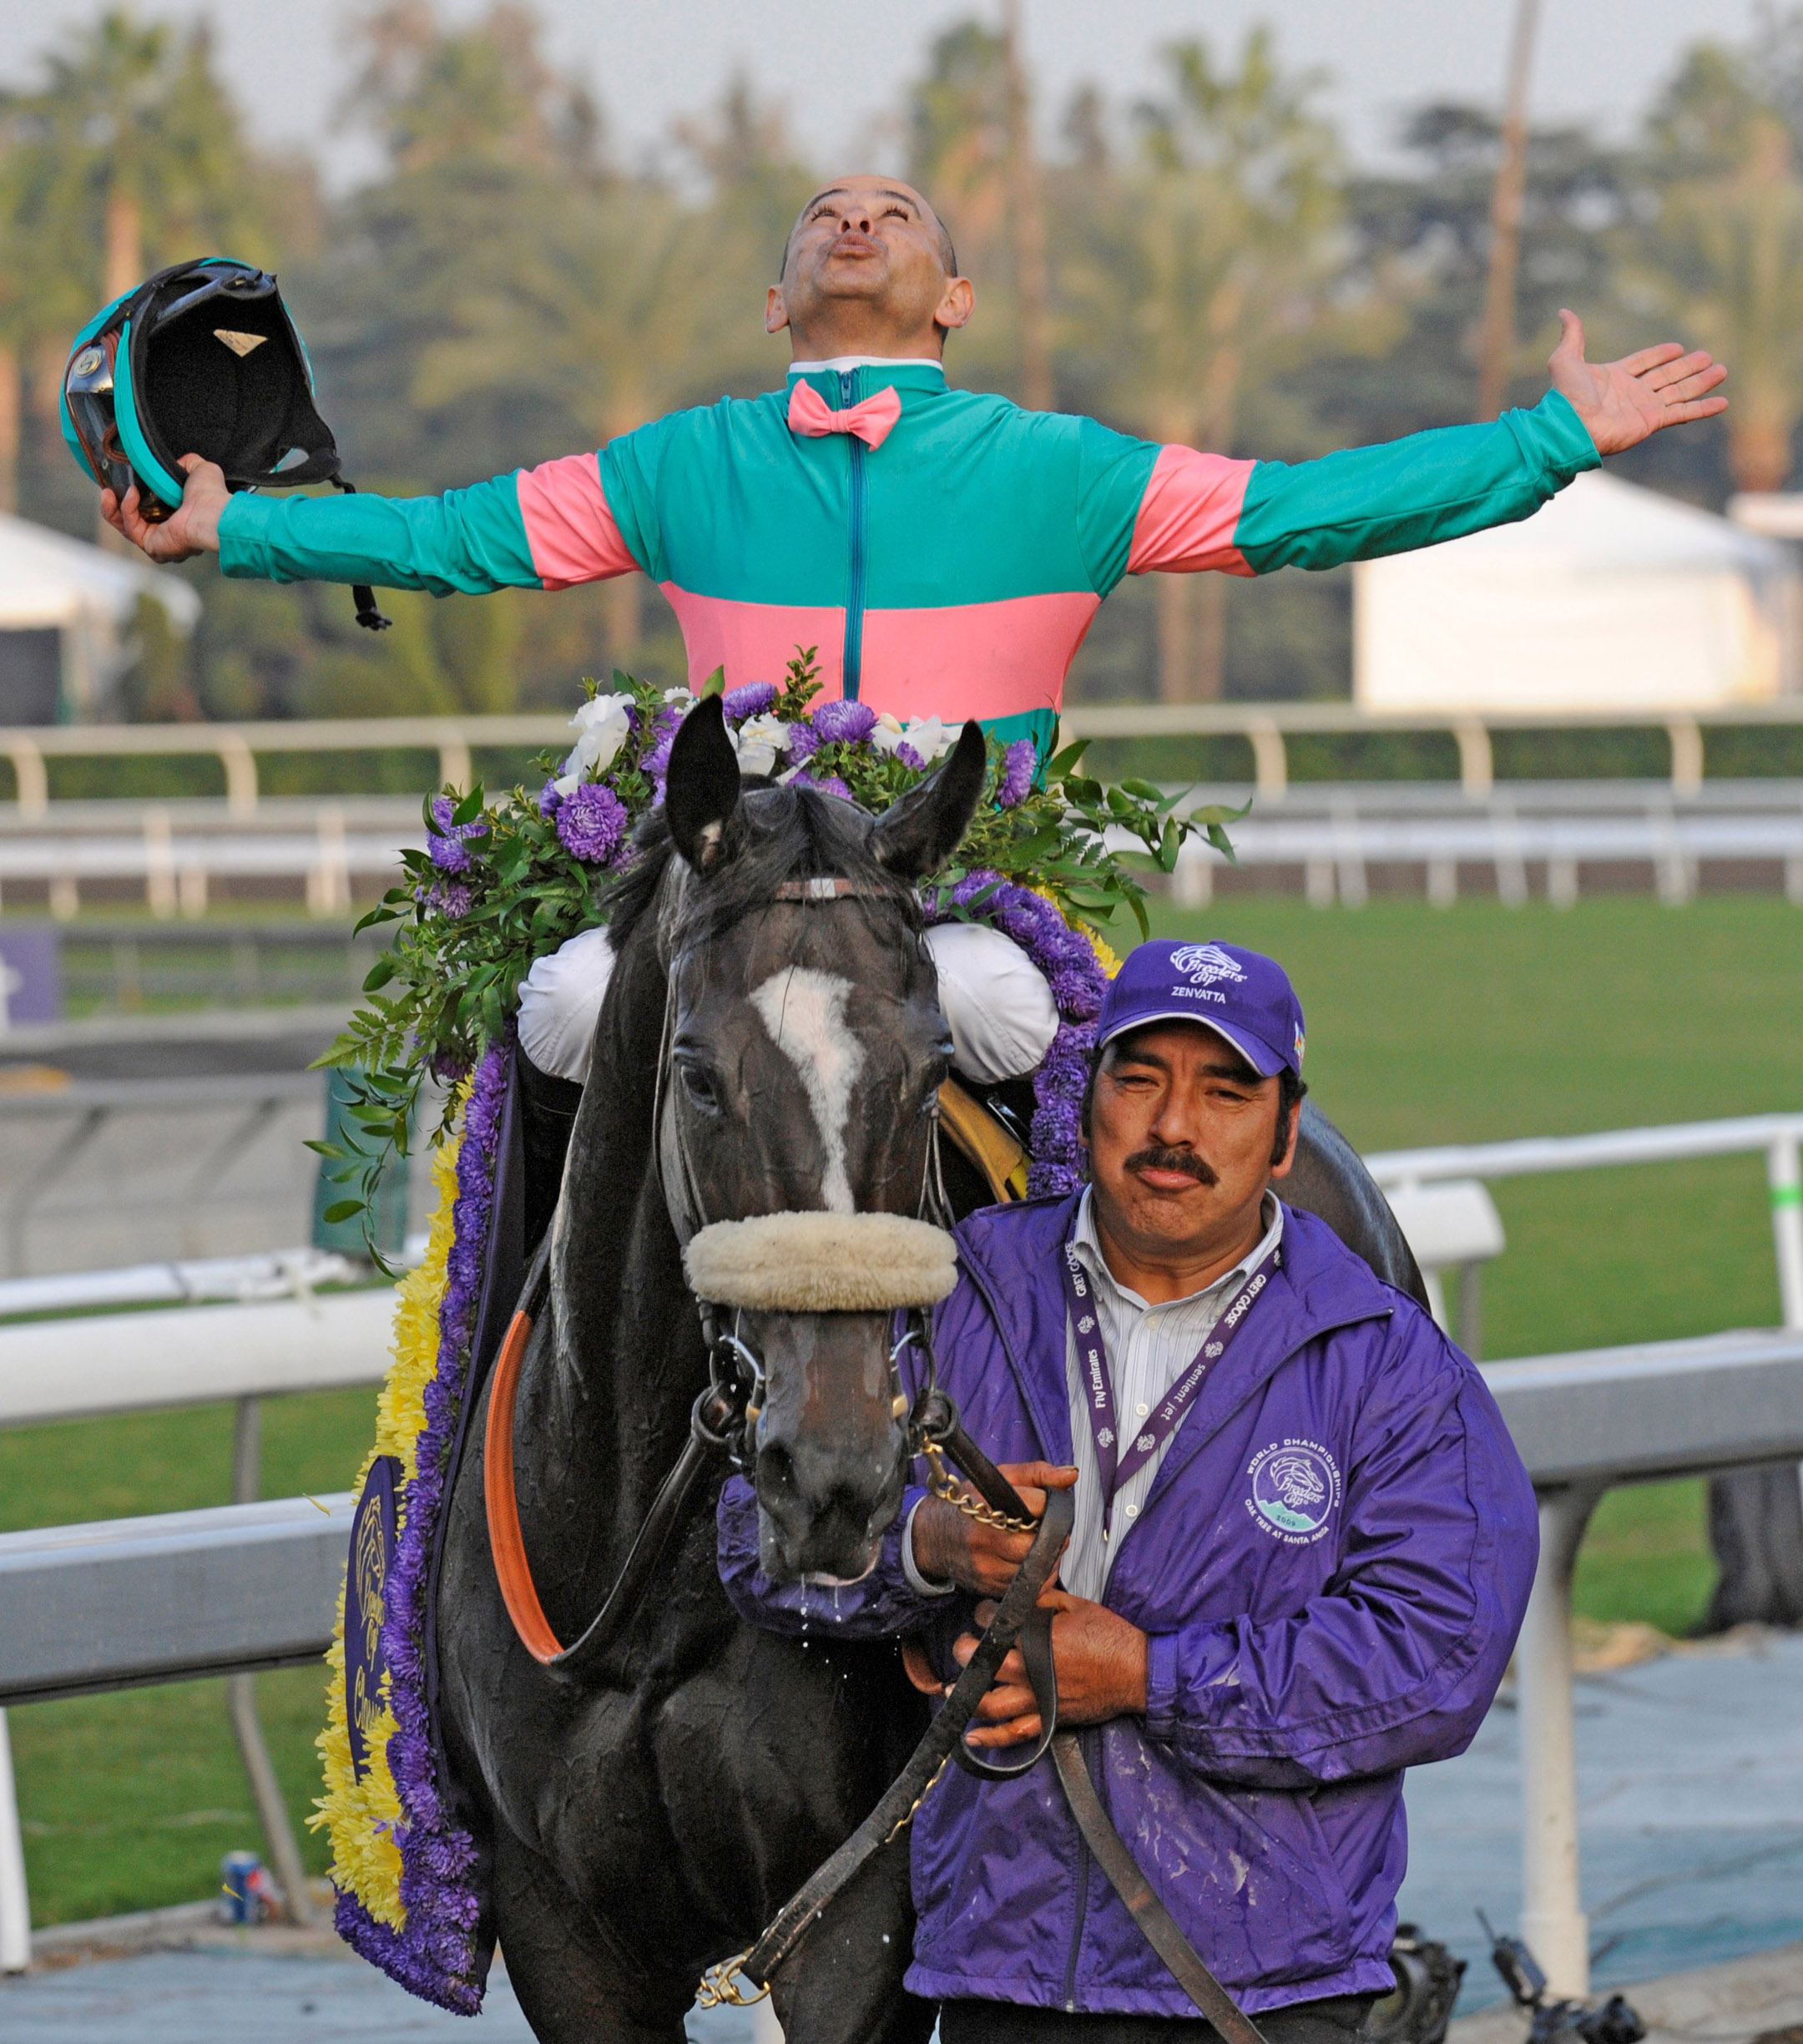 Mike Smith and Zenyatta after winning the 2009 Breeders' Cup Classic at Santa Anita (Skip Dickstein)